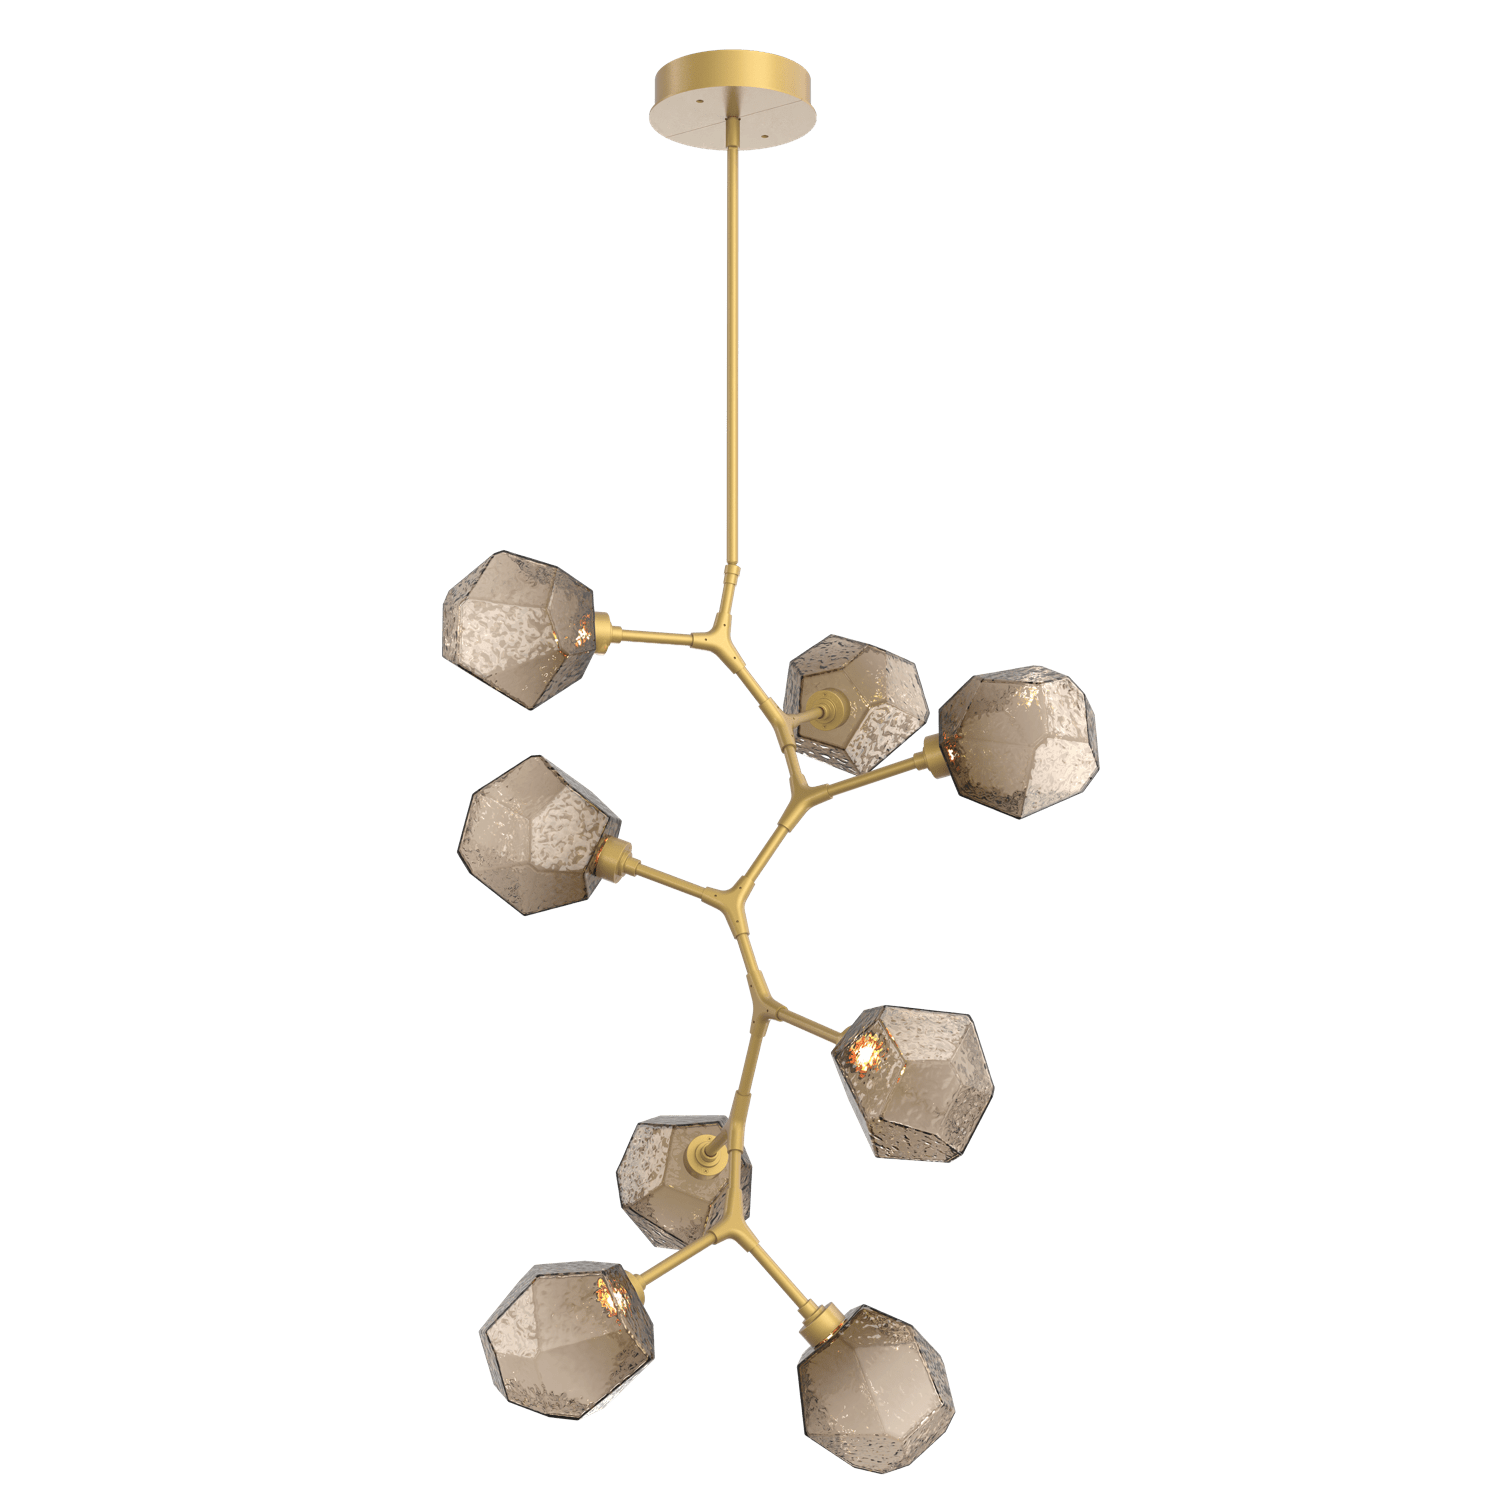 CHB0039-VB-GB-B-Hammerton-Studio-Gem-8-light-modern-vine-chandelier-with-gilded-brass-finish-and-bronze-blown-glass-shades-and-LED-lamping